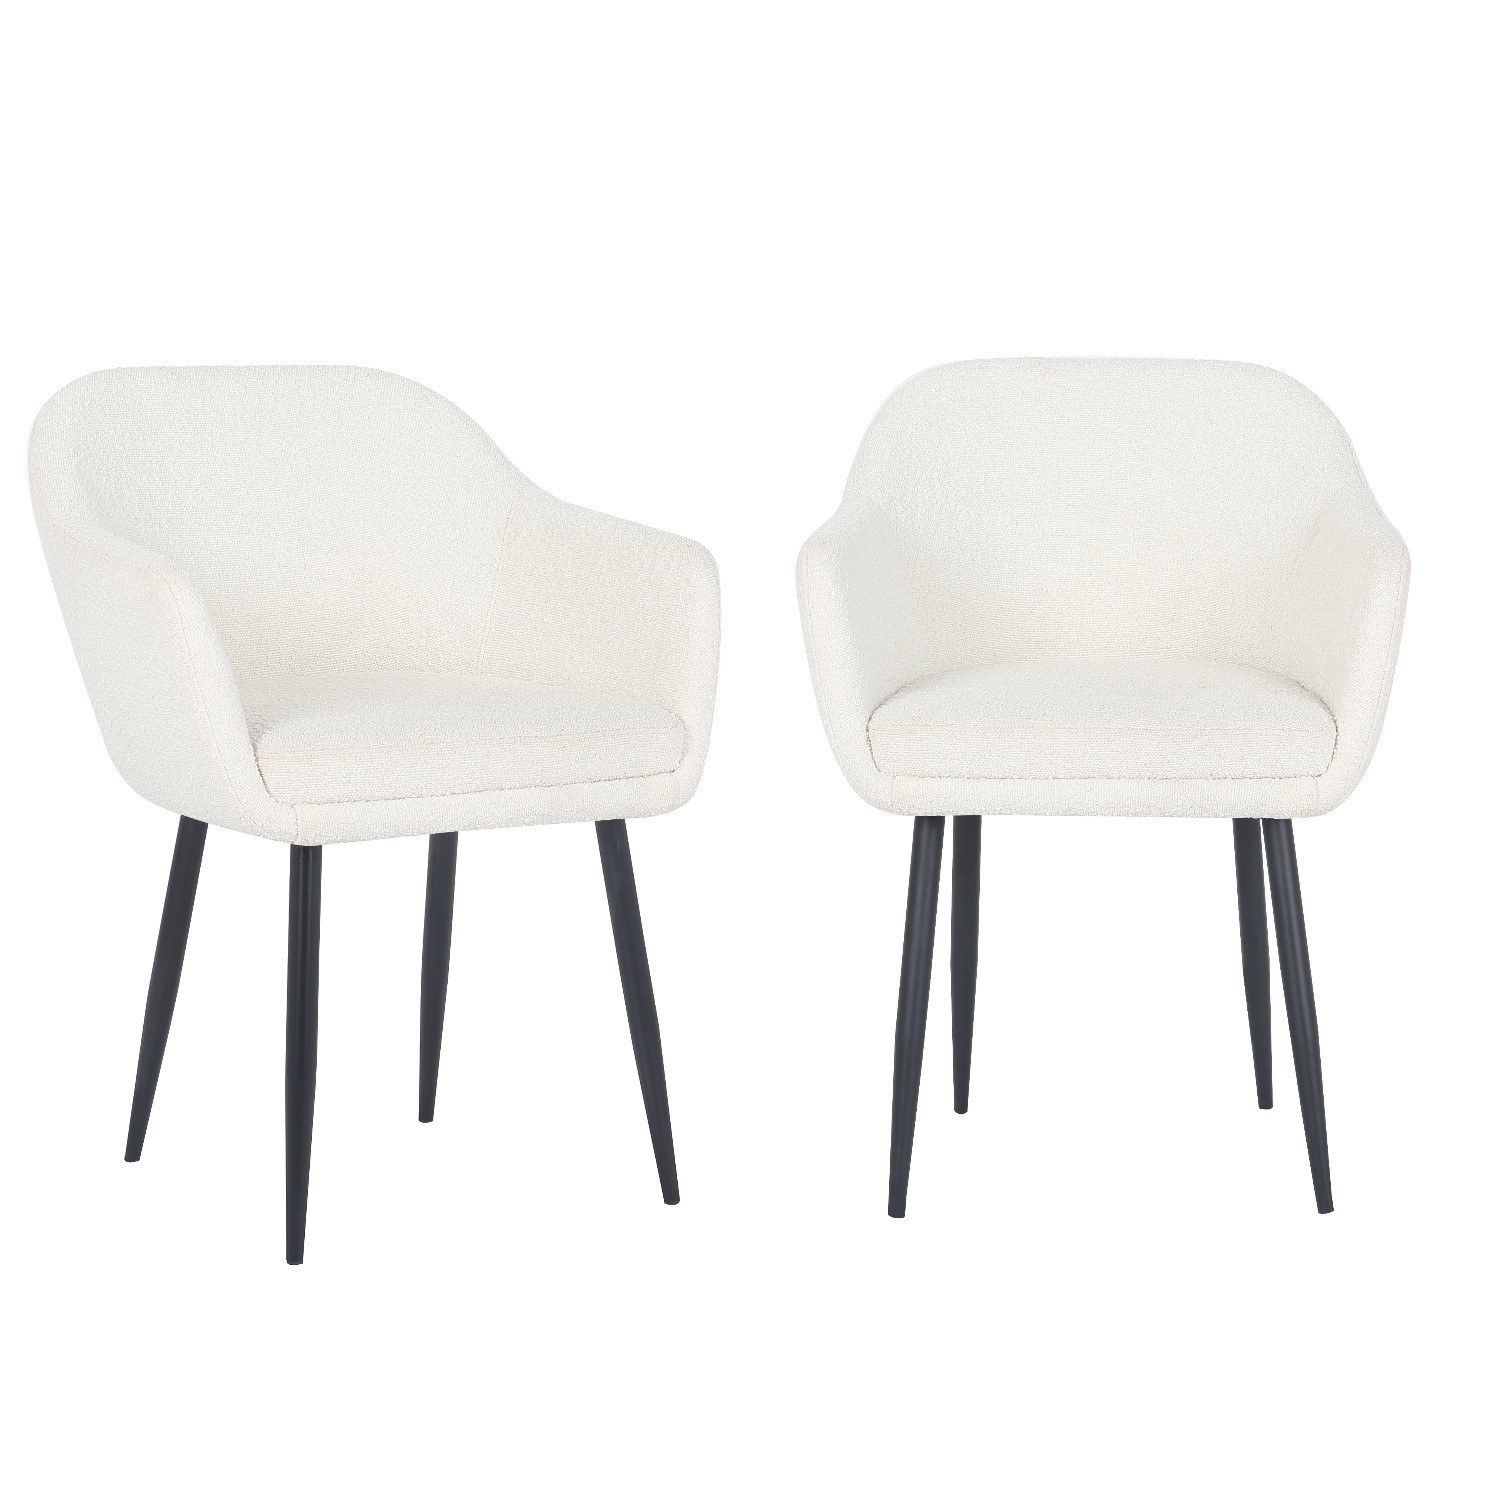 Photo of Set of 2 cream boucle armchair dining chairs - ally